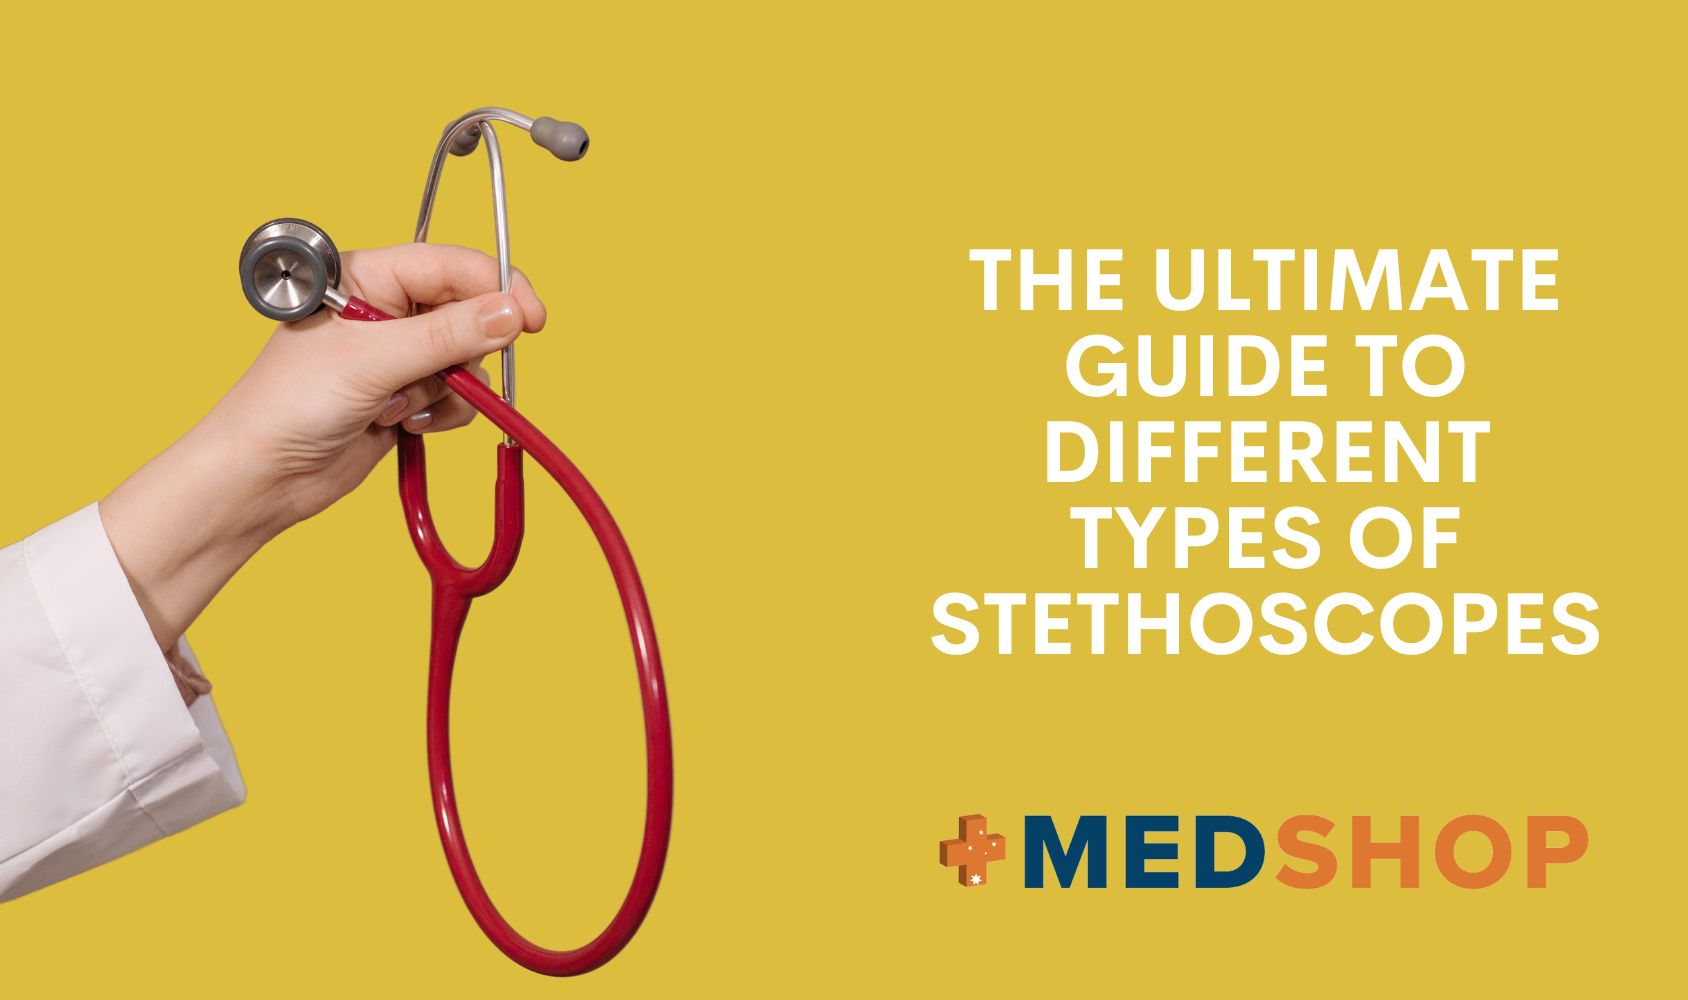 https://cdn.shopify.com/s/files/1/0012/8440/7394/files/Ultimate_Guide_to_Different_Types_of_Stethoscopes.jpg?v=1666772738